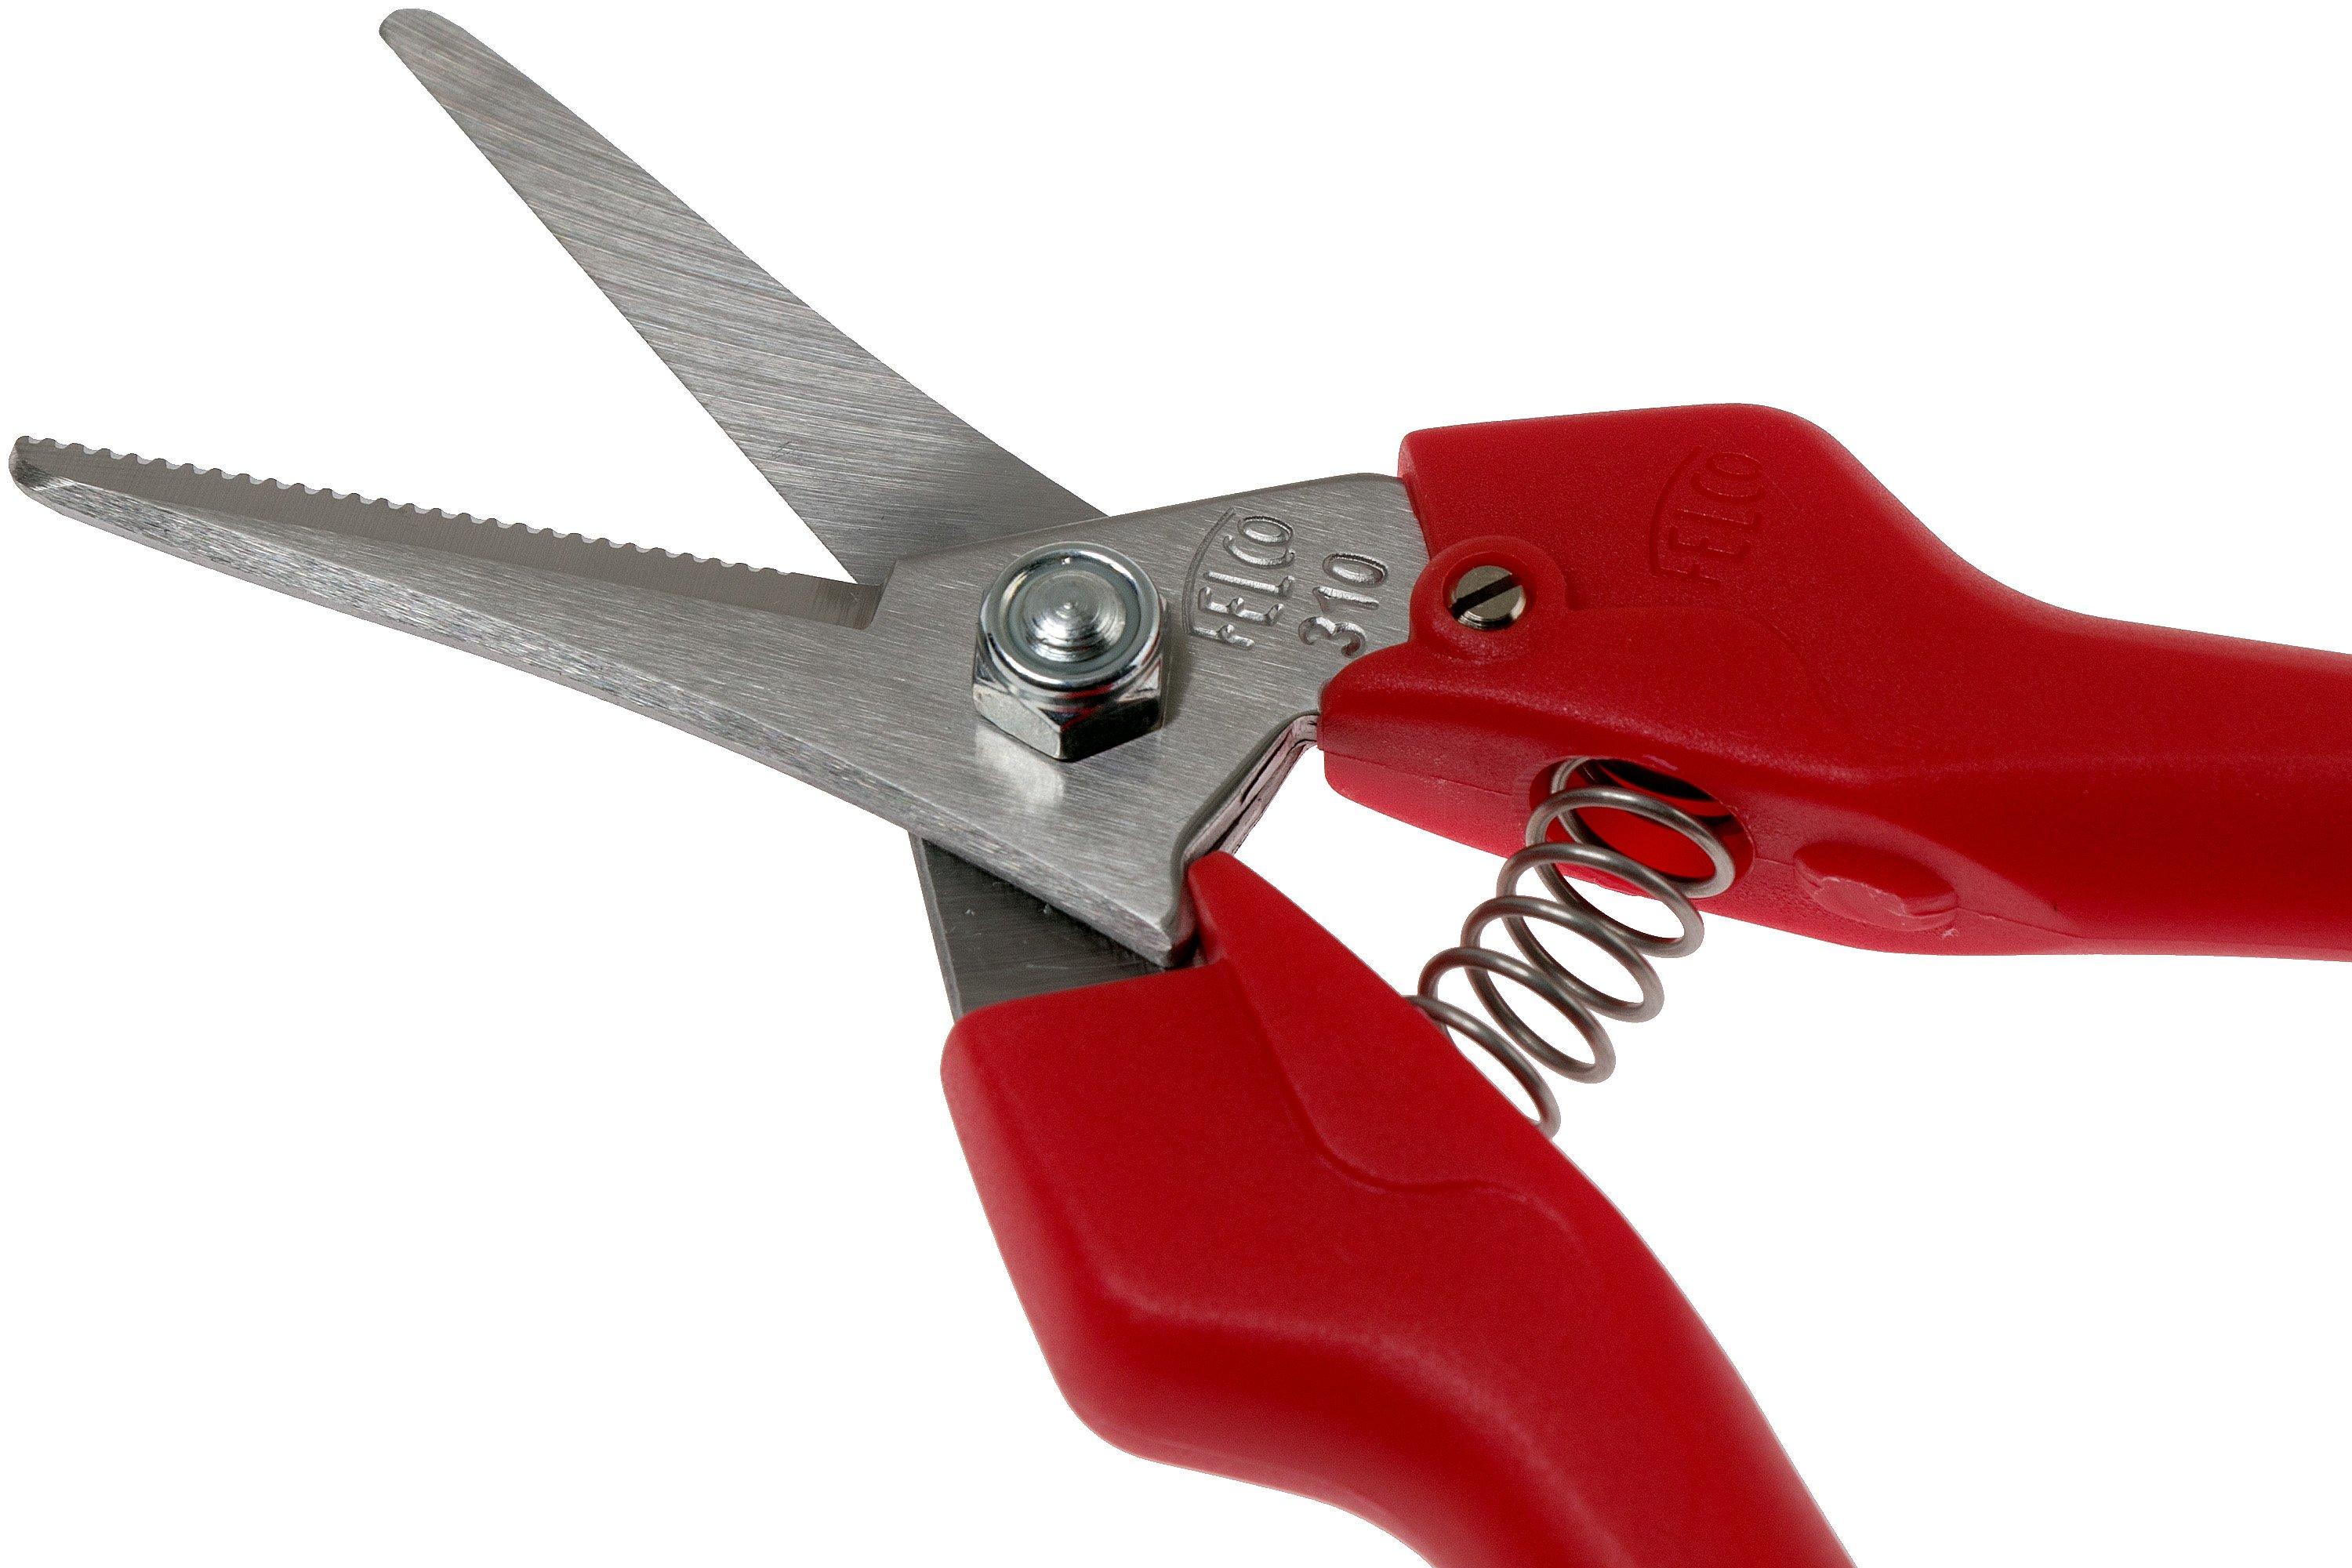 Felco 310 Pruning Snips with Sharpening Tool Bundle, 2 Items 